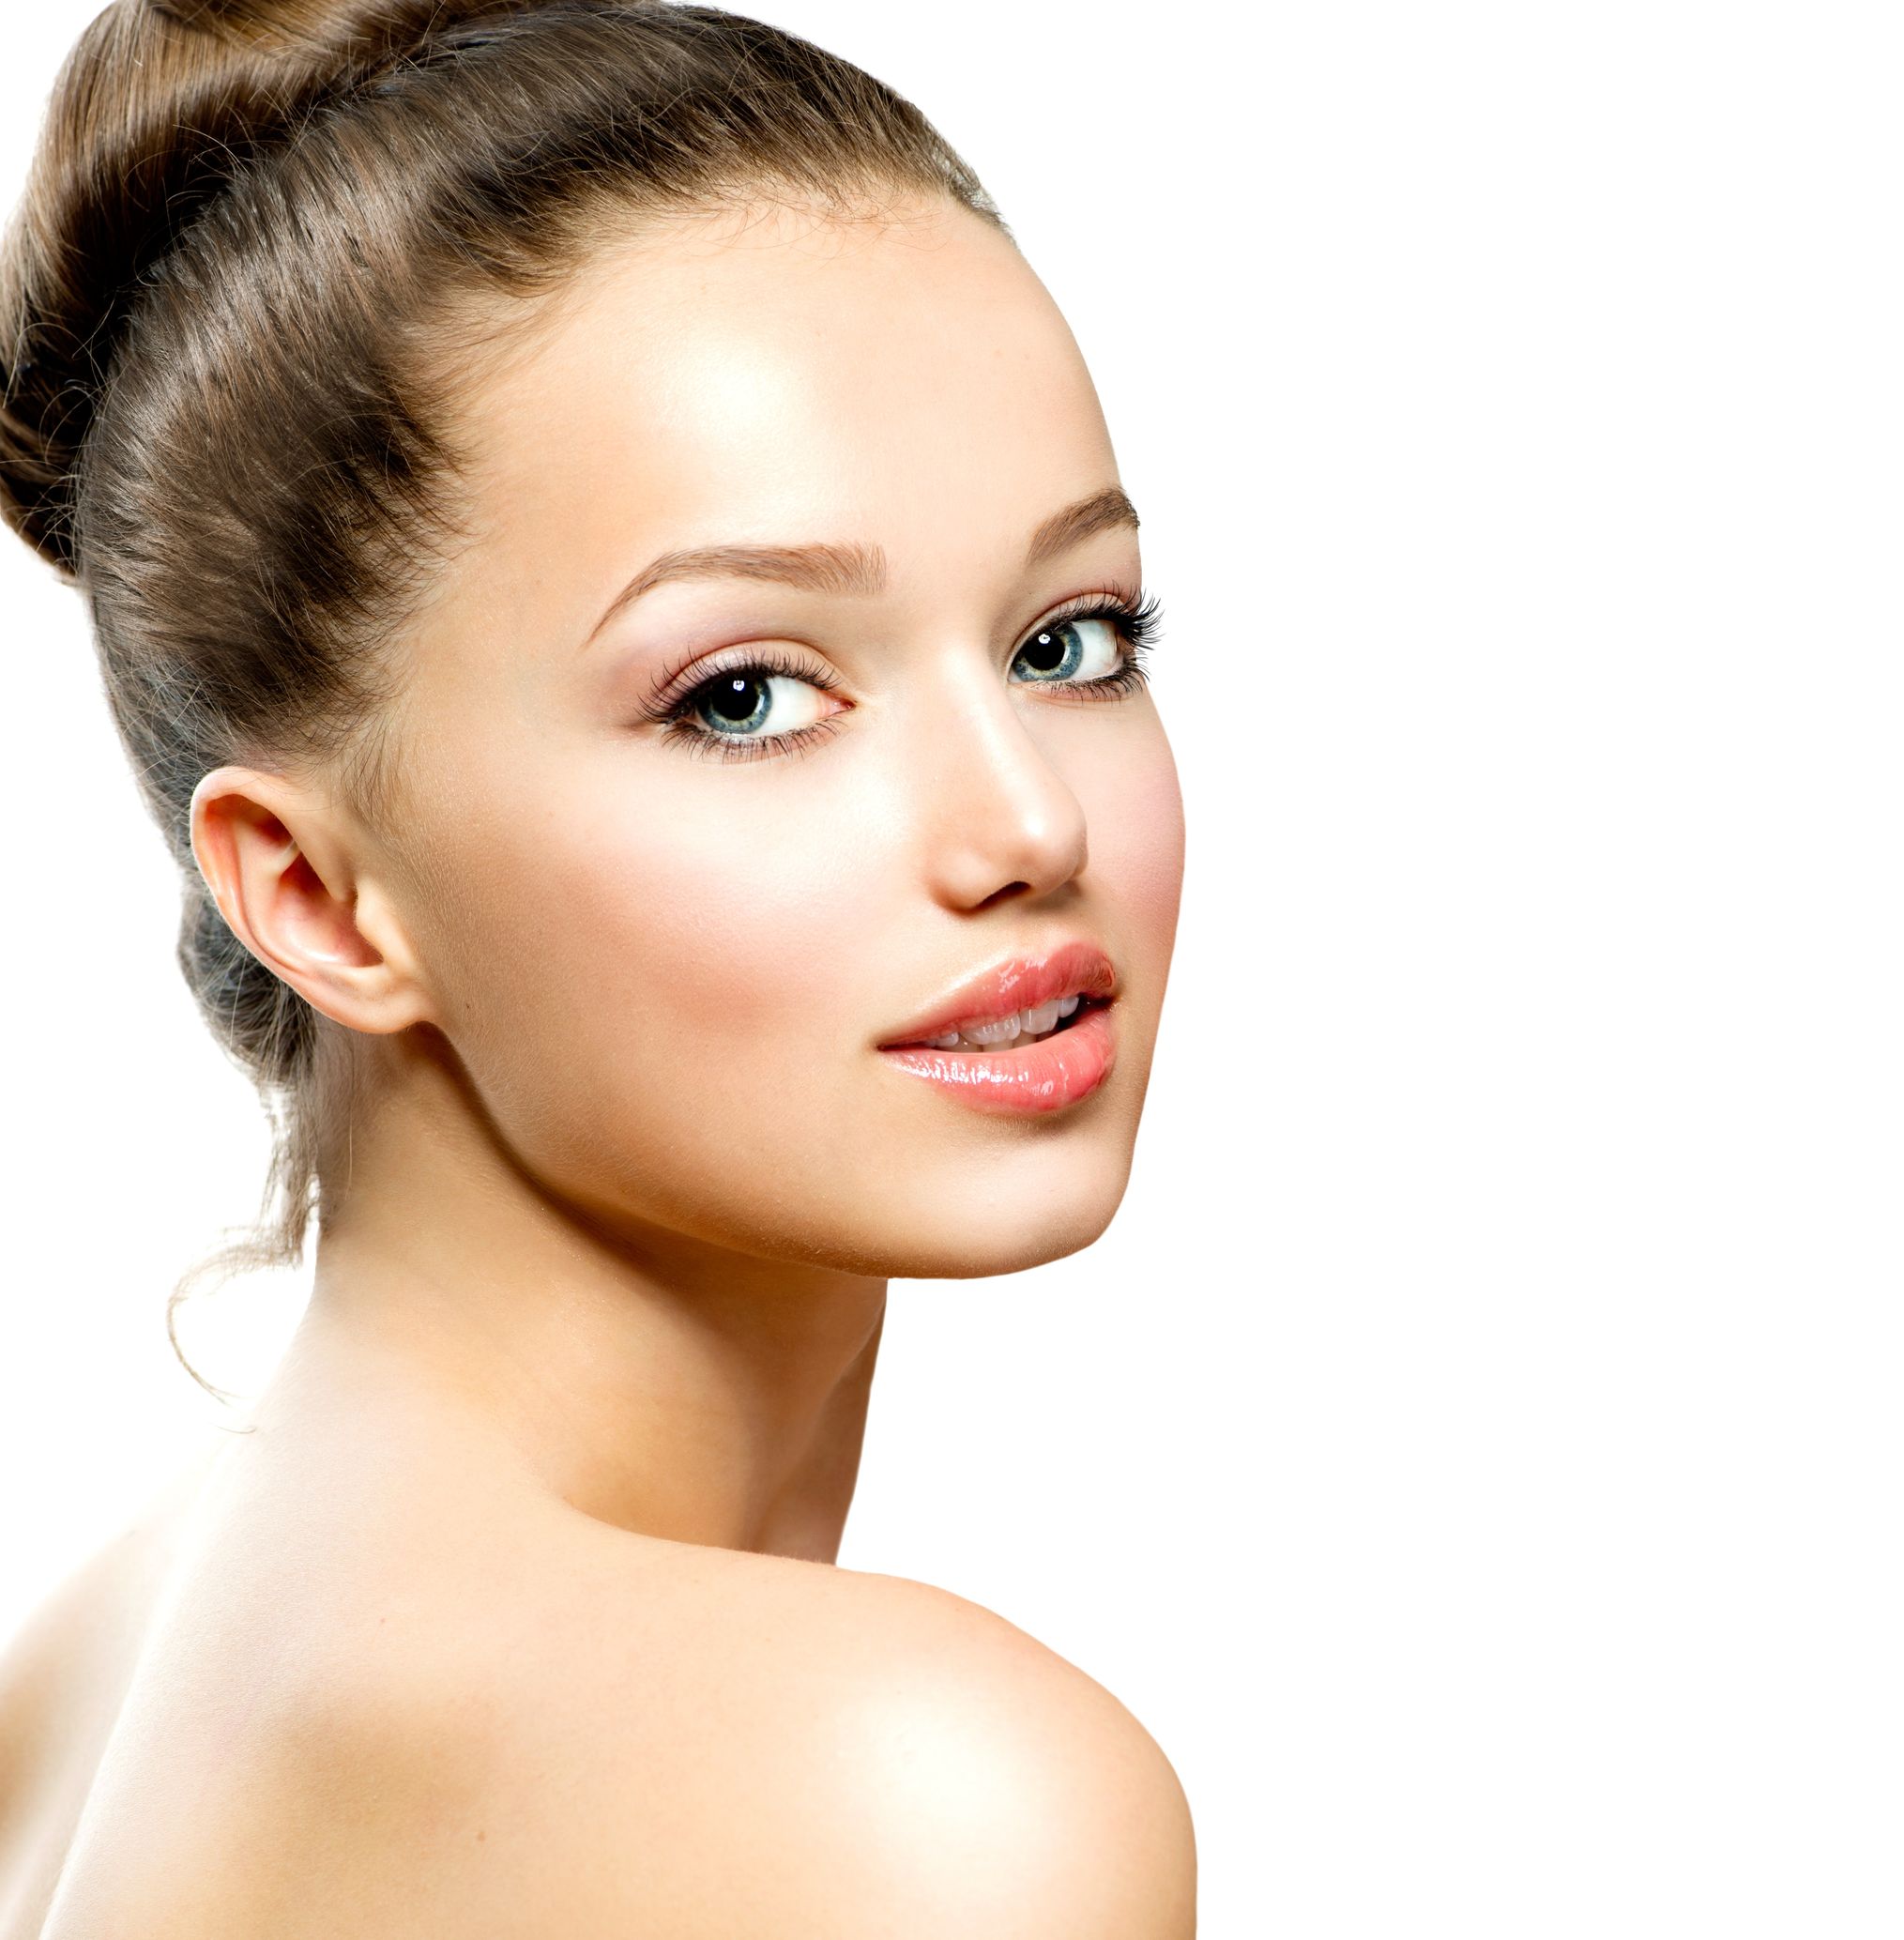 Livening Up Your Look With Non-Surgical Facelift Options in Las Vegas, NV